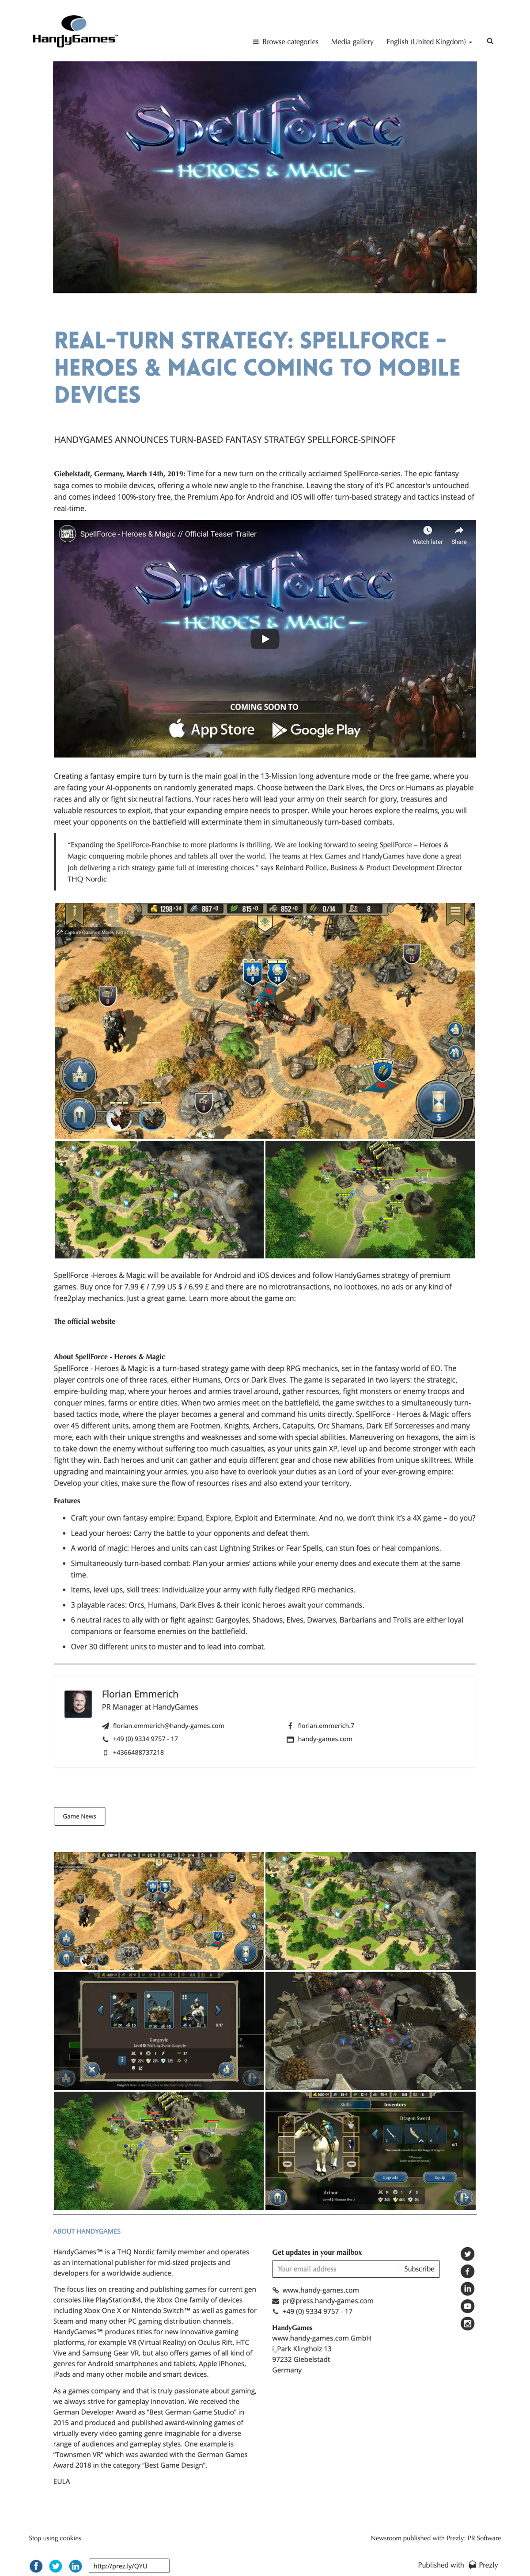 Real-turn strategy: SpellForce - Heroes & Magic coming to mobile devices